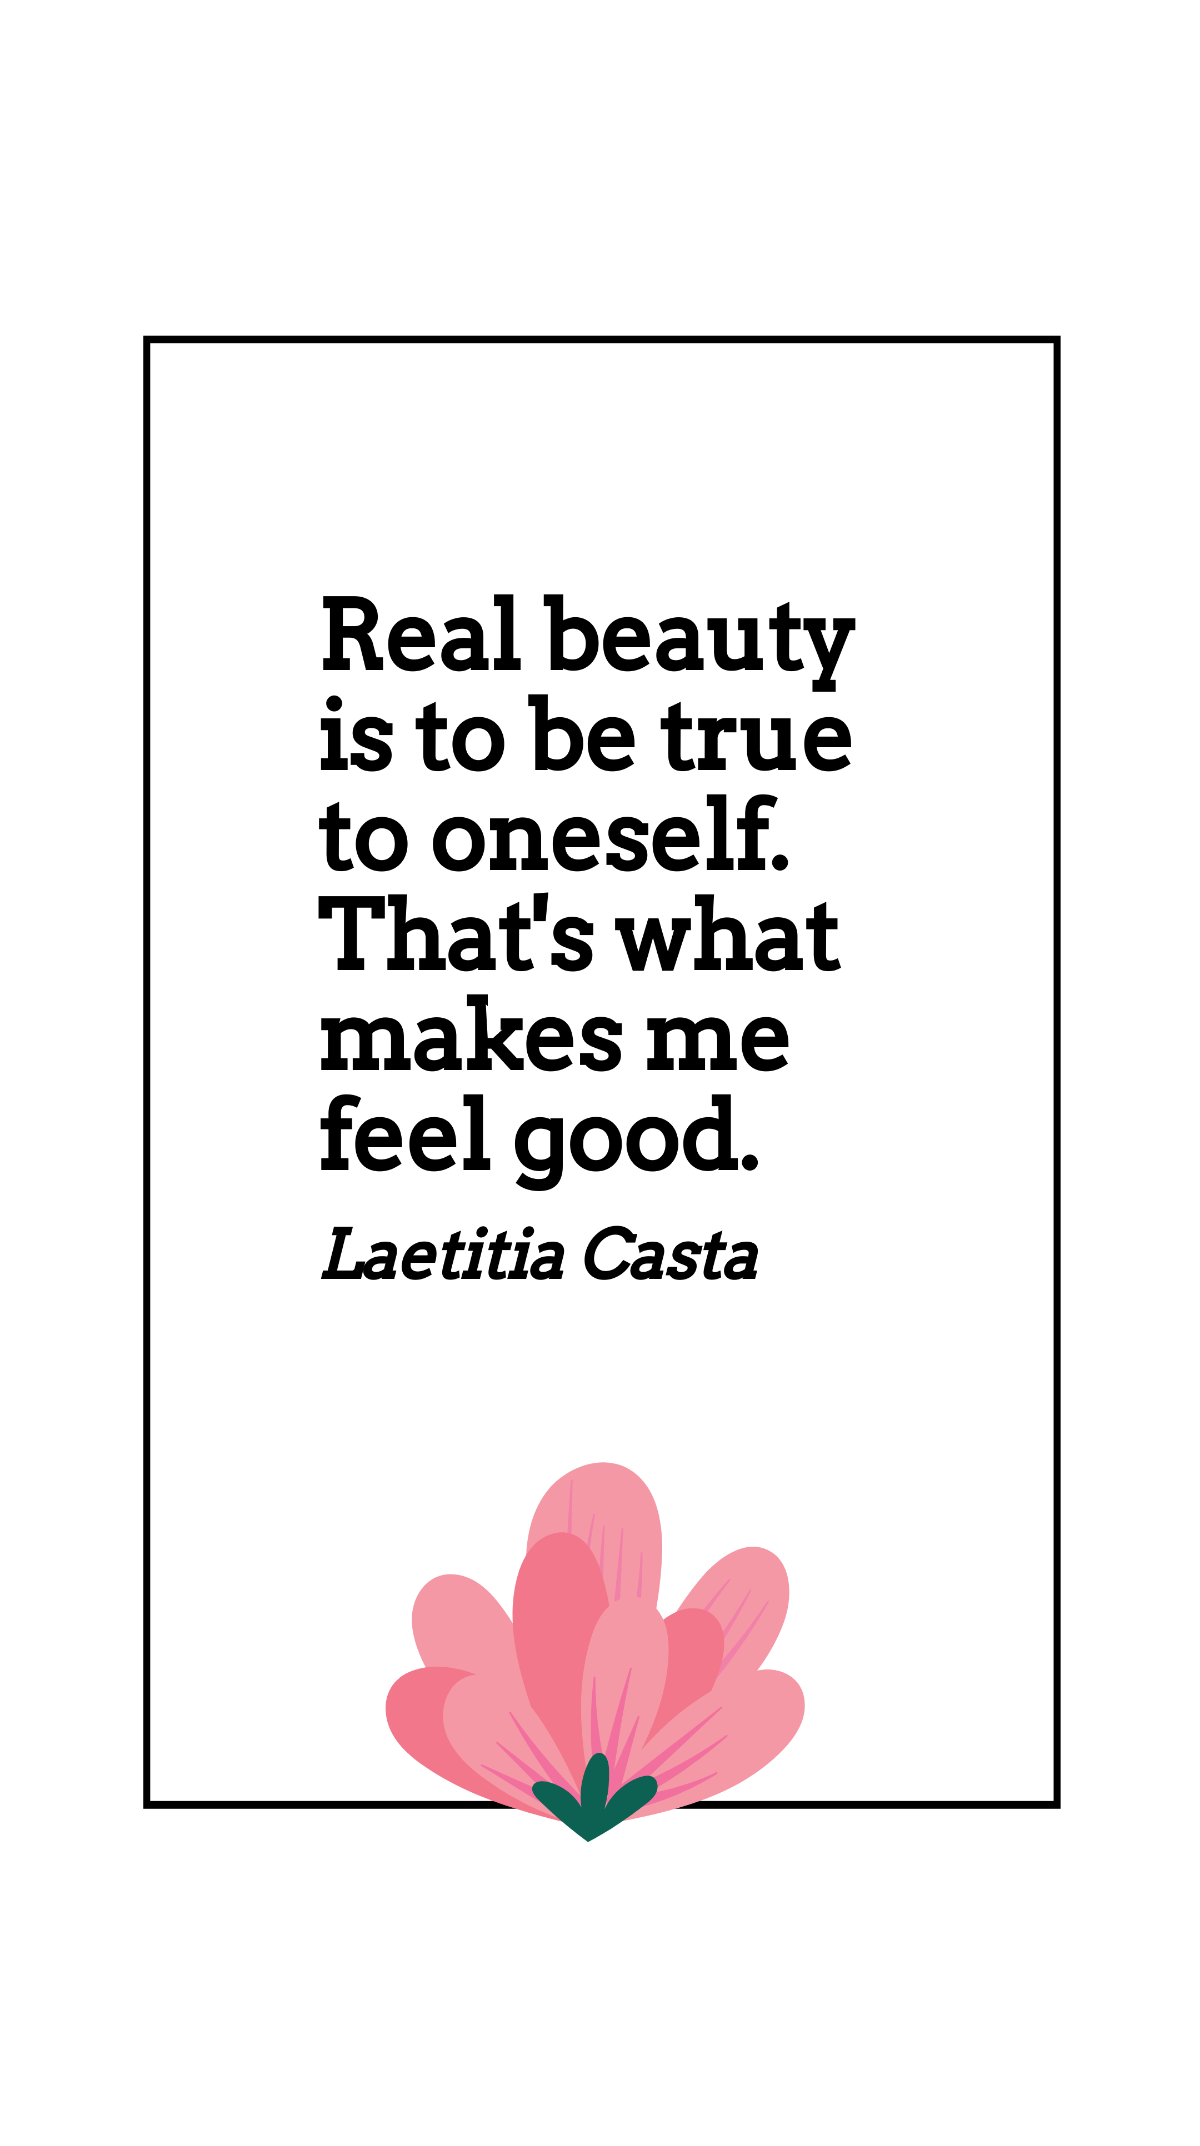 Free Laetitia Casta - Real beauty is to be true to oneself. That's what makes me feel good. Template